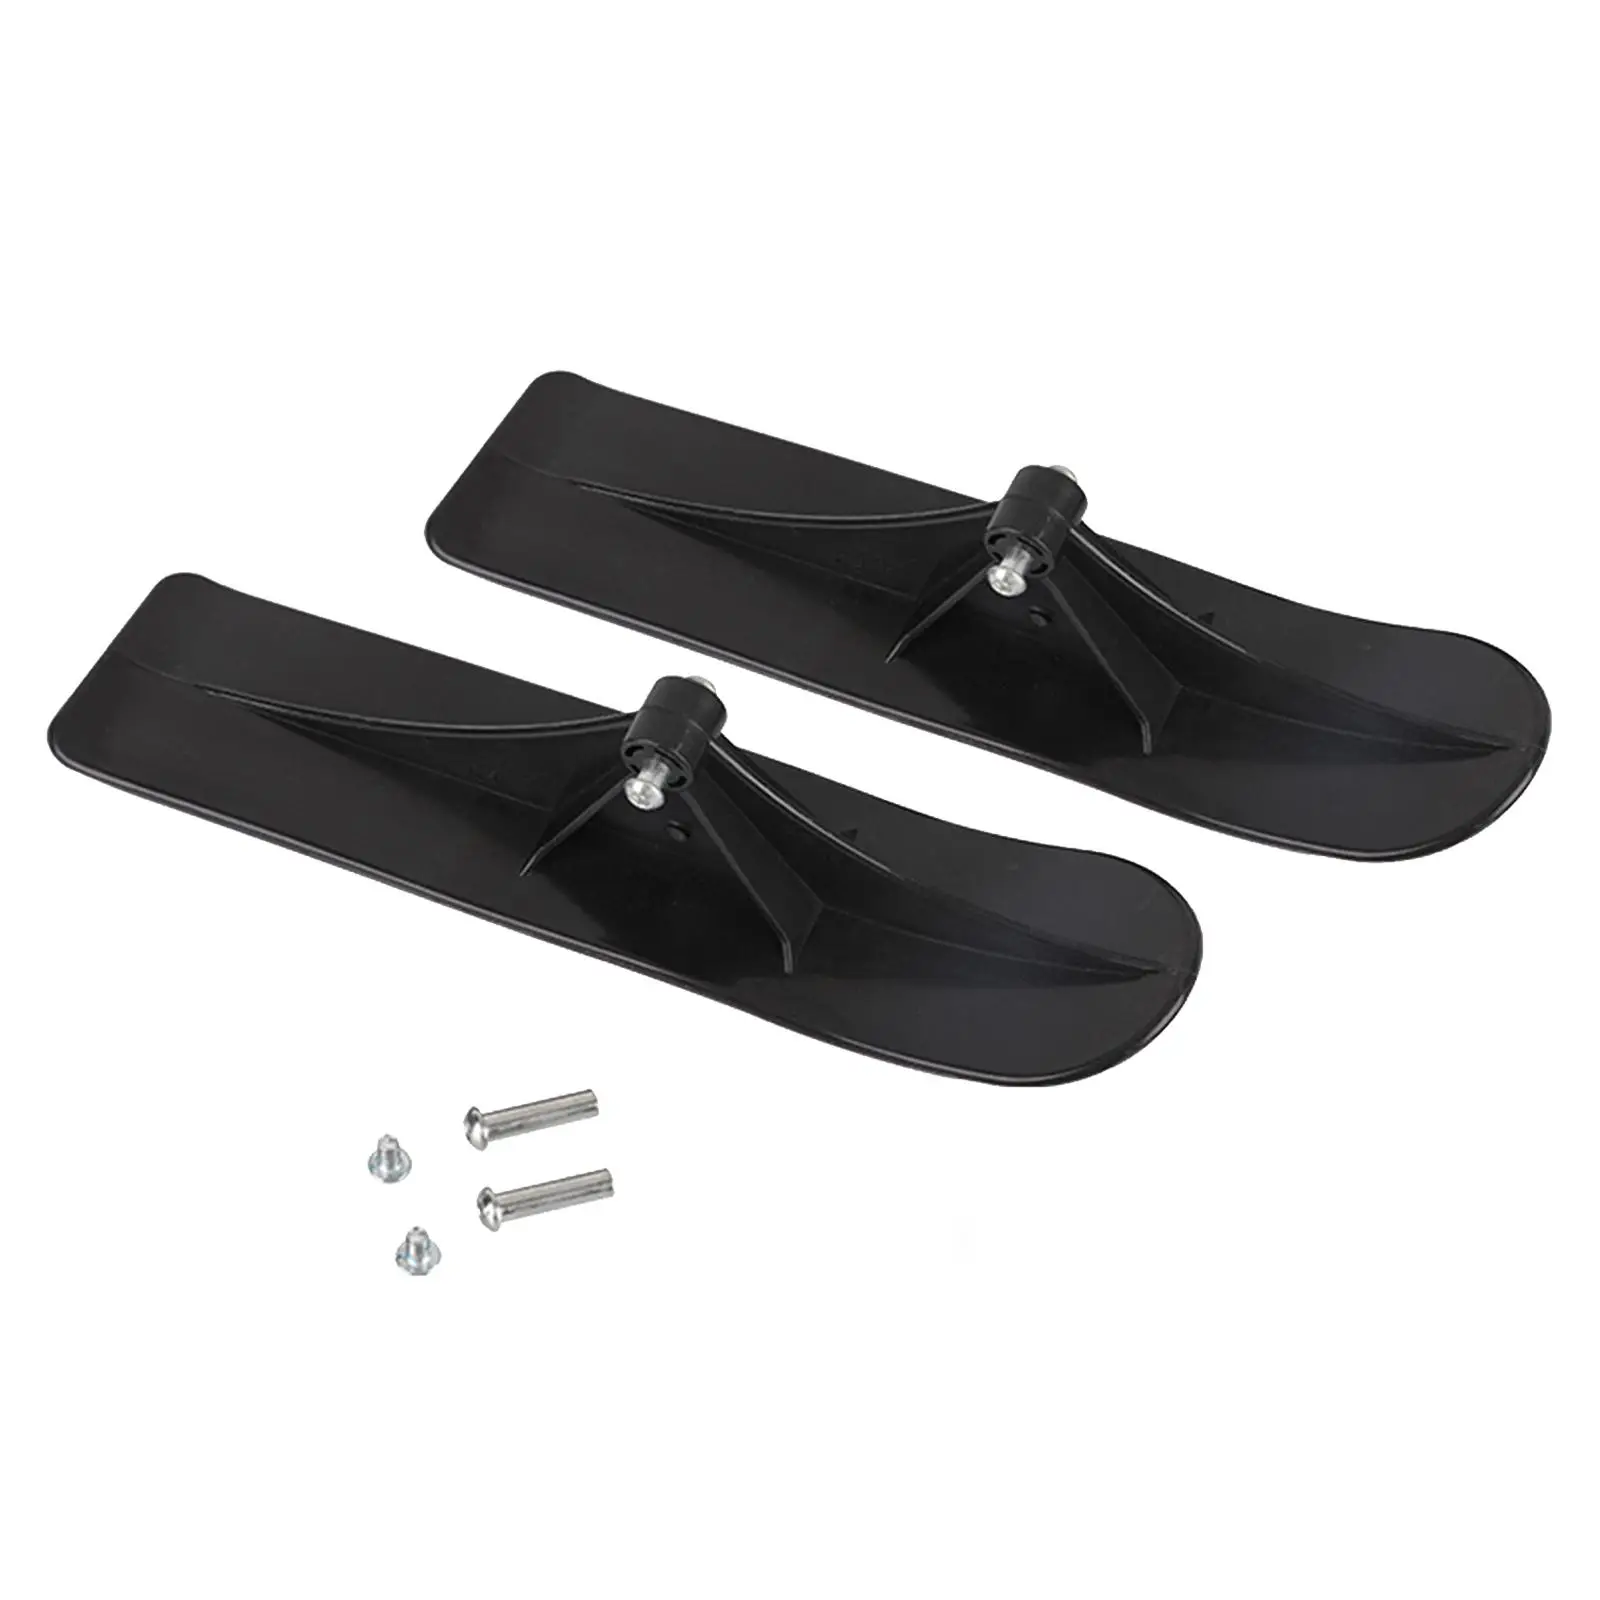 Snow Scooter Ski Sled Toboggan Refit Boots Creative Ski Board for Downhill Sleds Novices